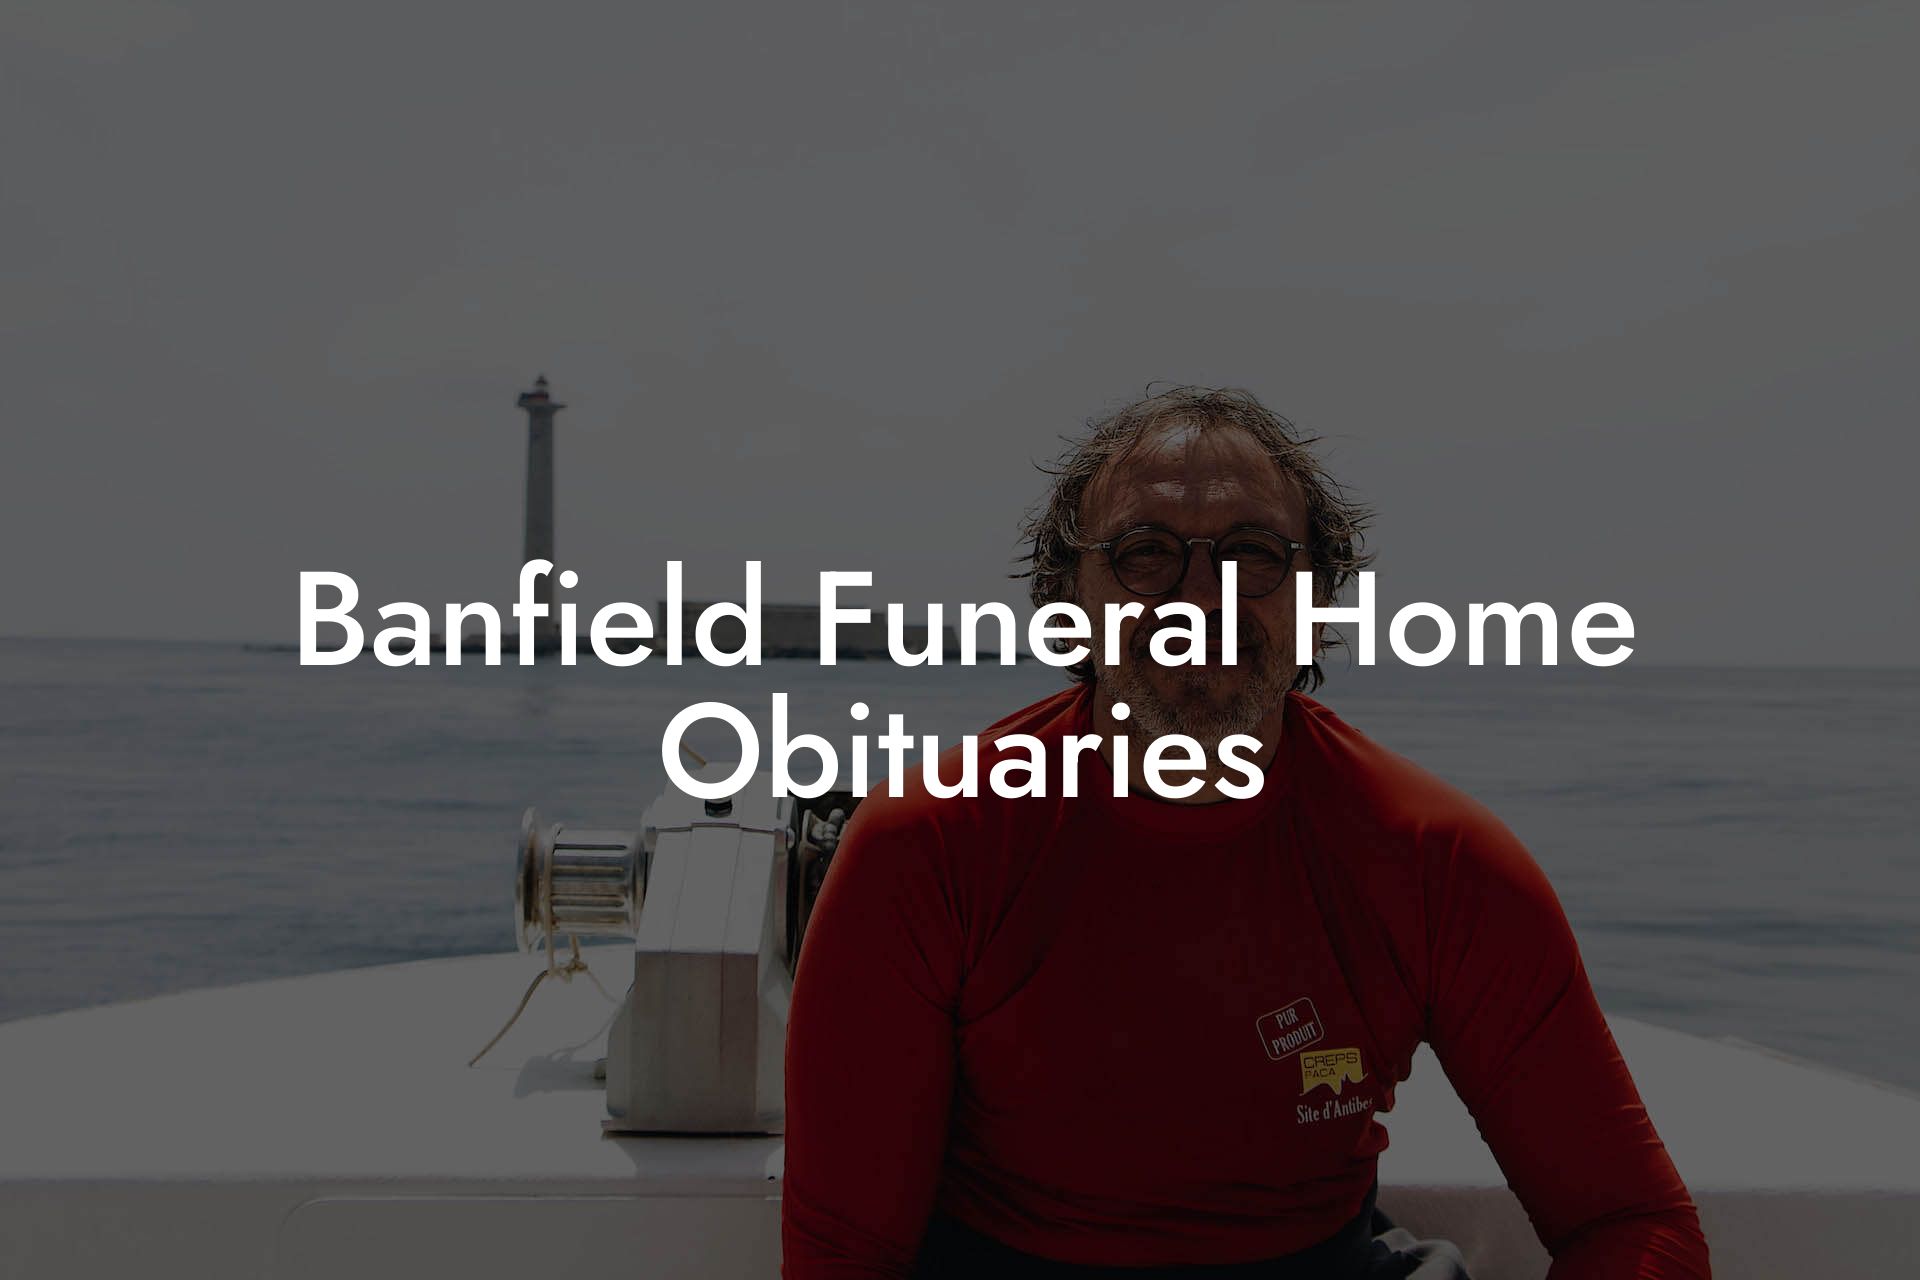 Banfield Funeral Home Obituaries